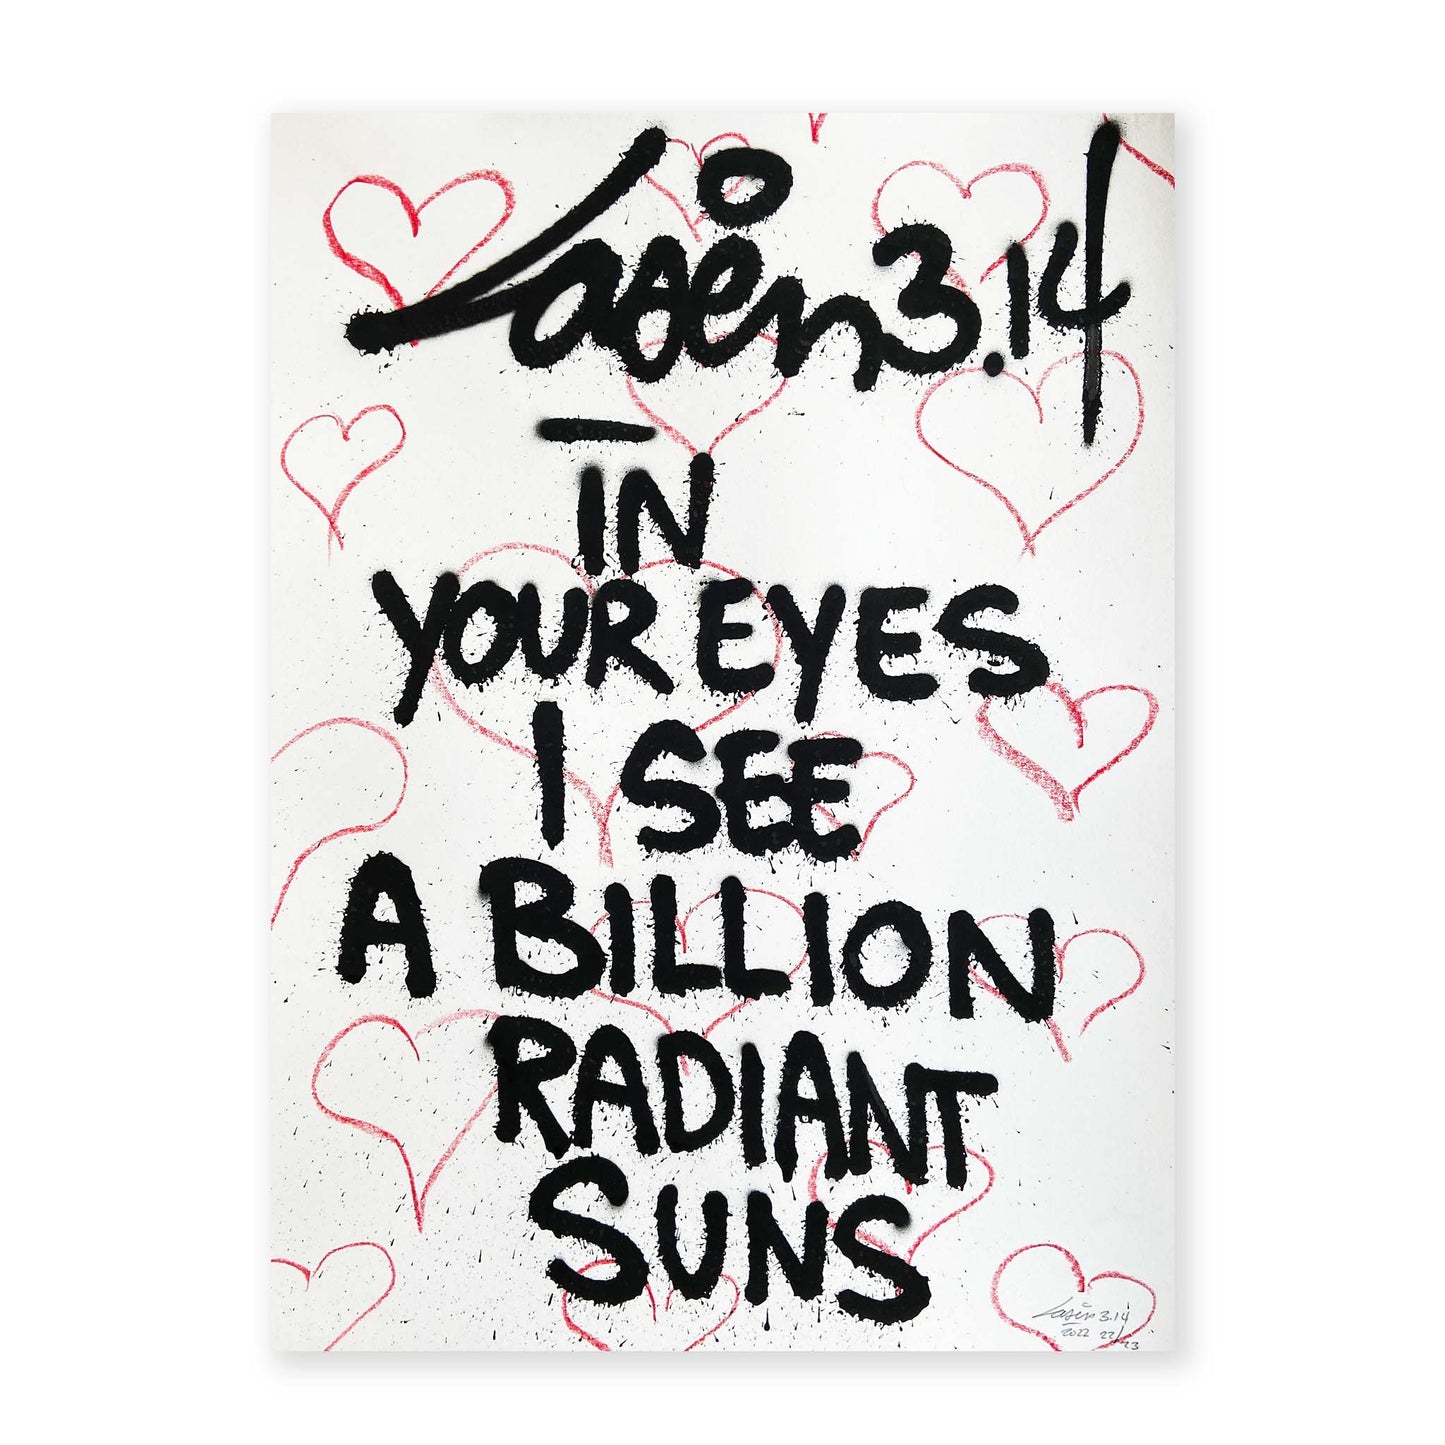 In Your Eyes I See A Billion Radiant Suns 22/23 - Valentine's Day Edition 2022